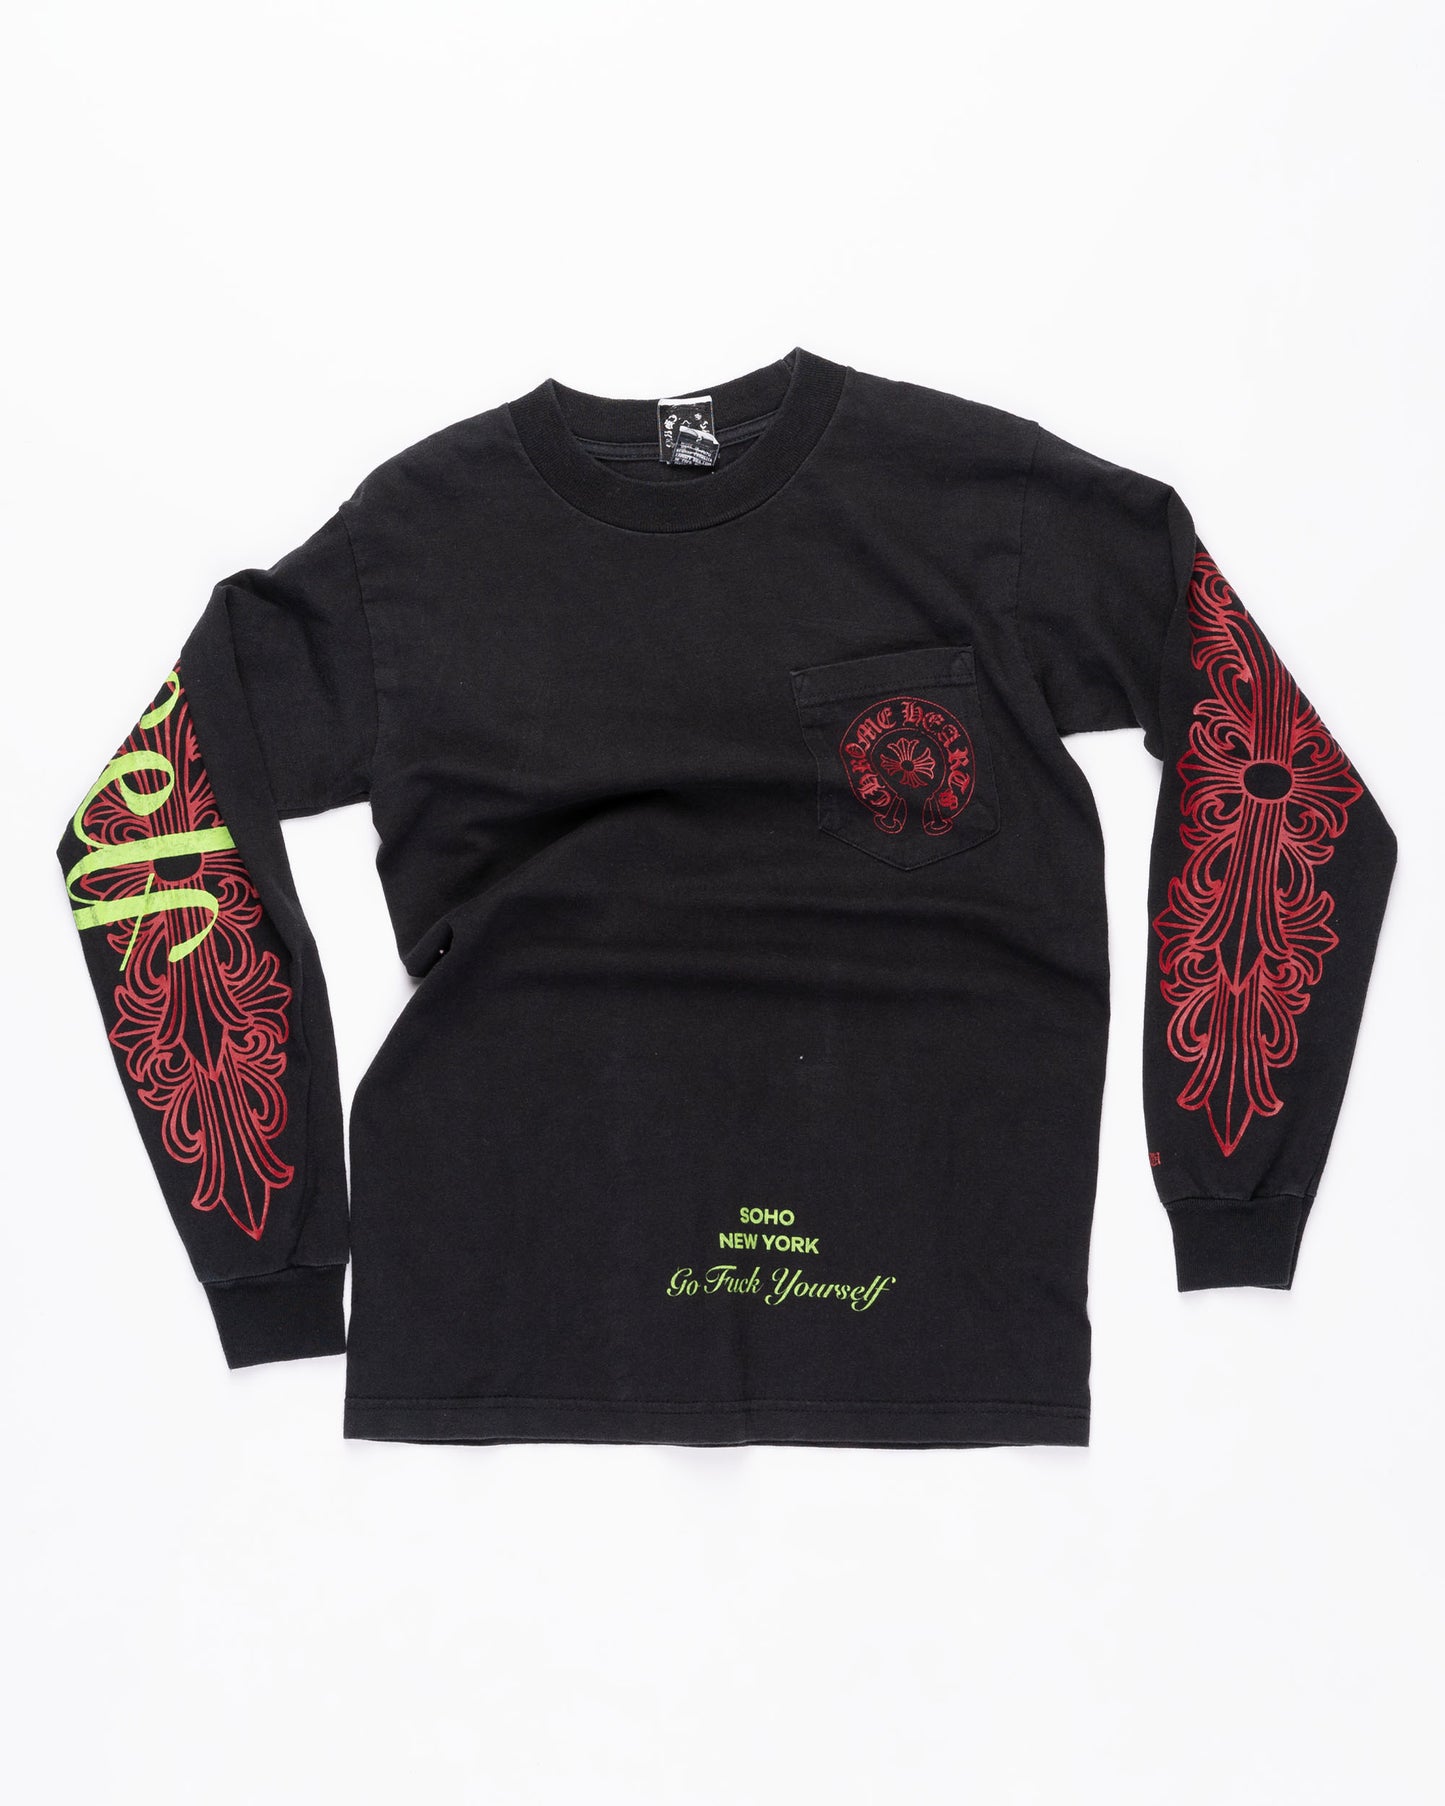 Black And Red Chrome Hearts Long Sleeve Size: Small